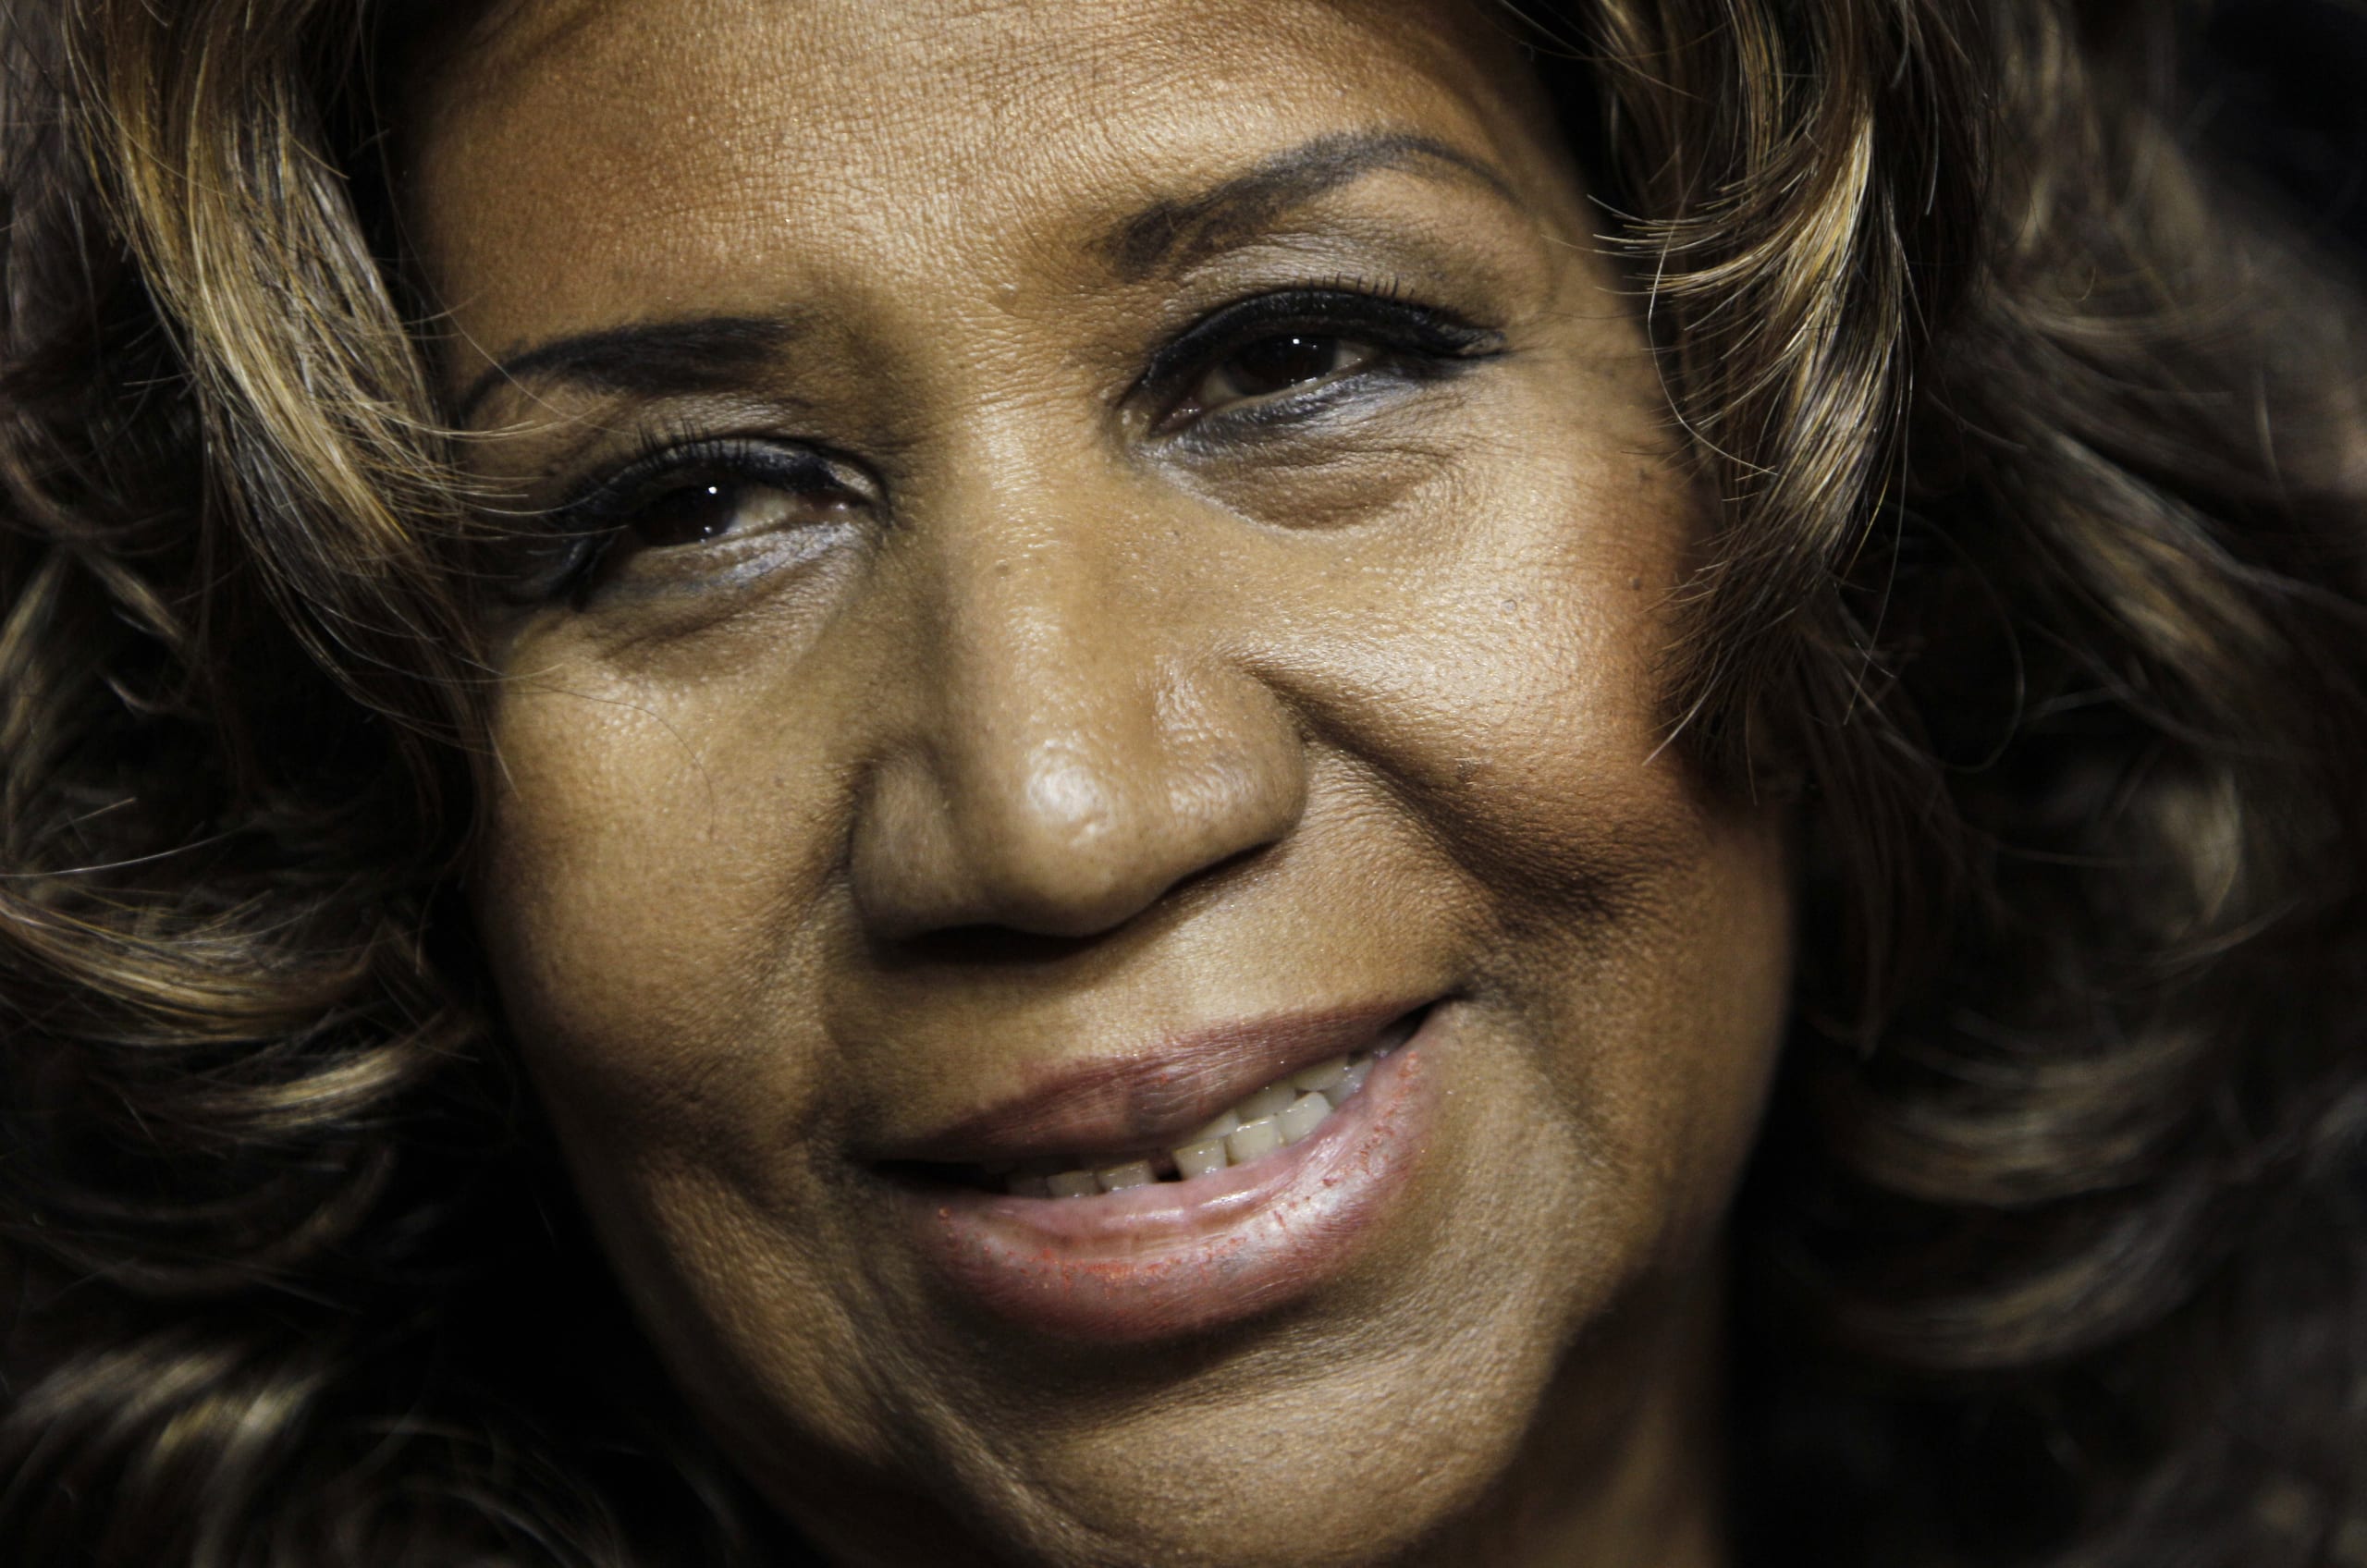 Pricey Aretha Franklin case teaches a lesson. Pay for a formal, professional will